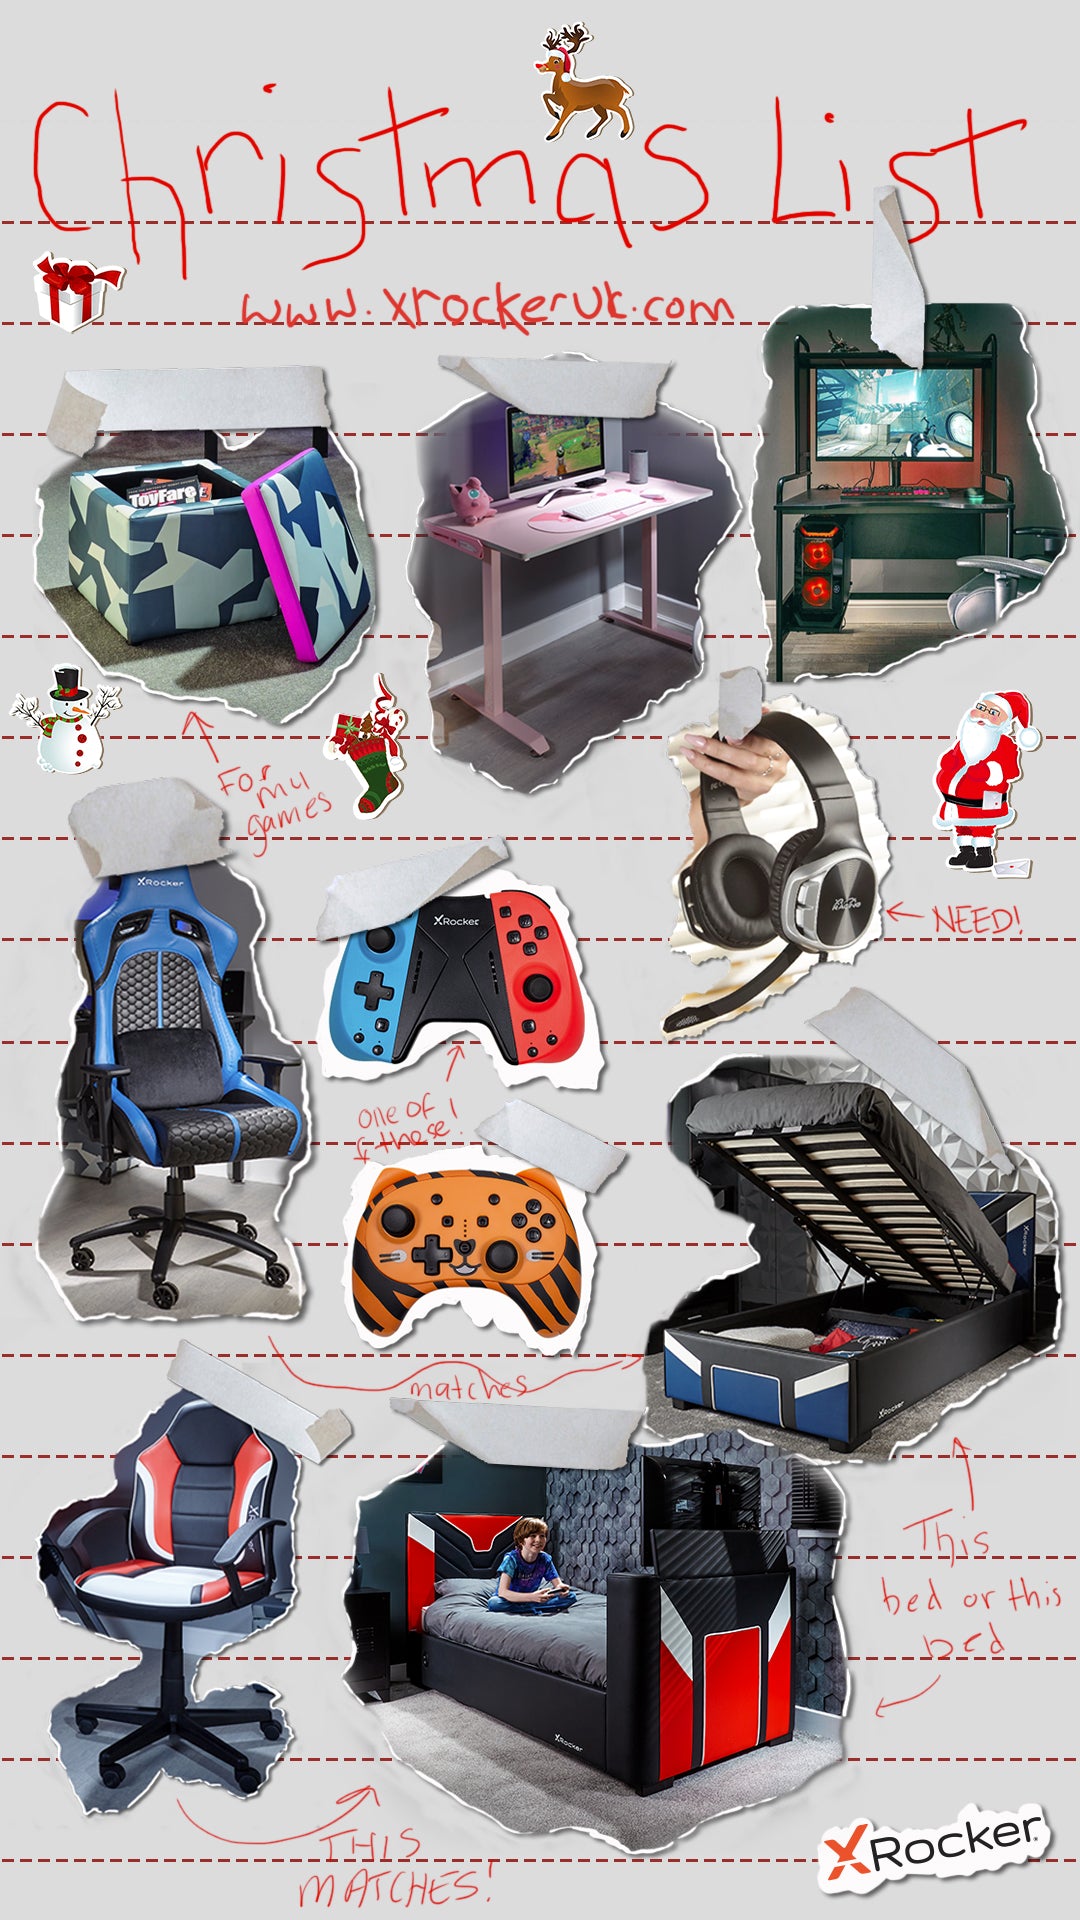 x rocker christmas gift guide list including gaming chairs, headsets and controllers